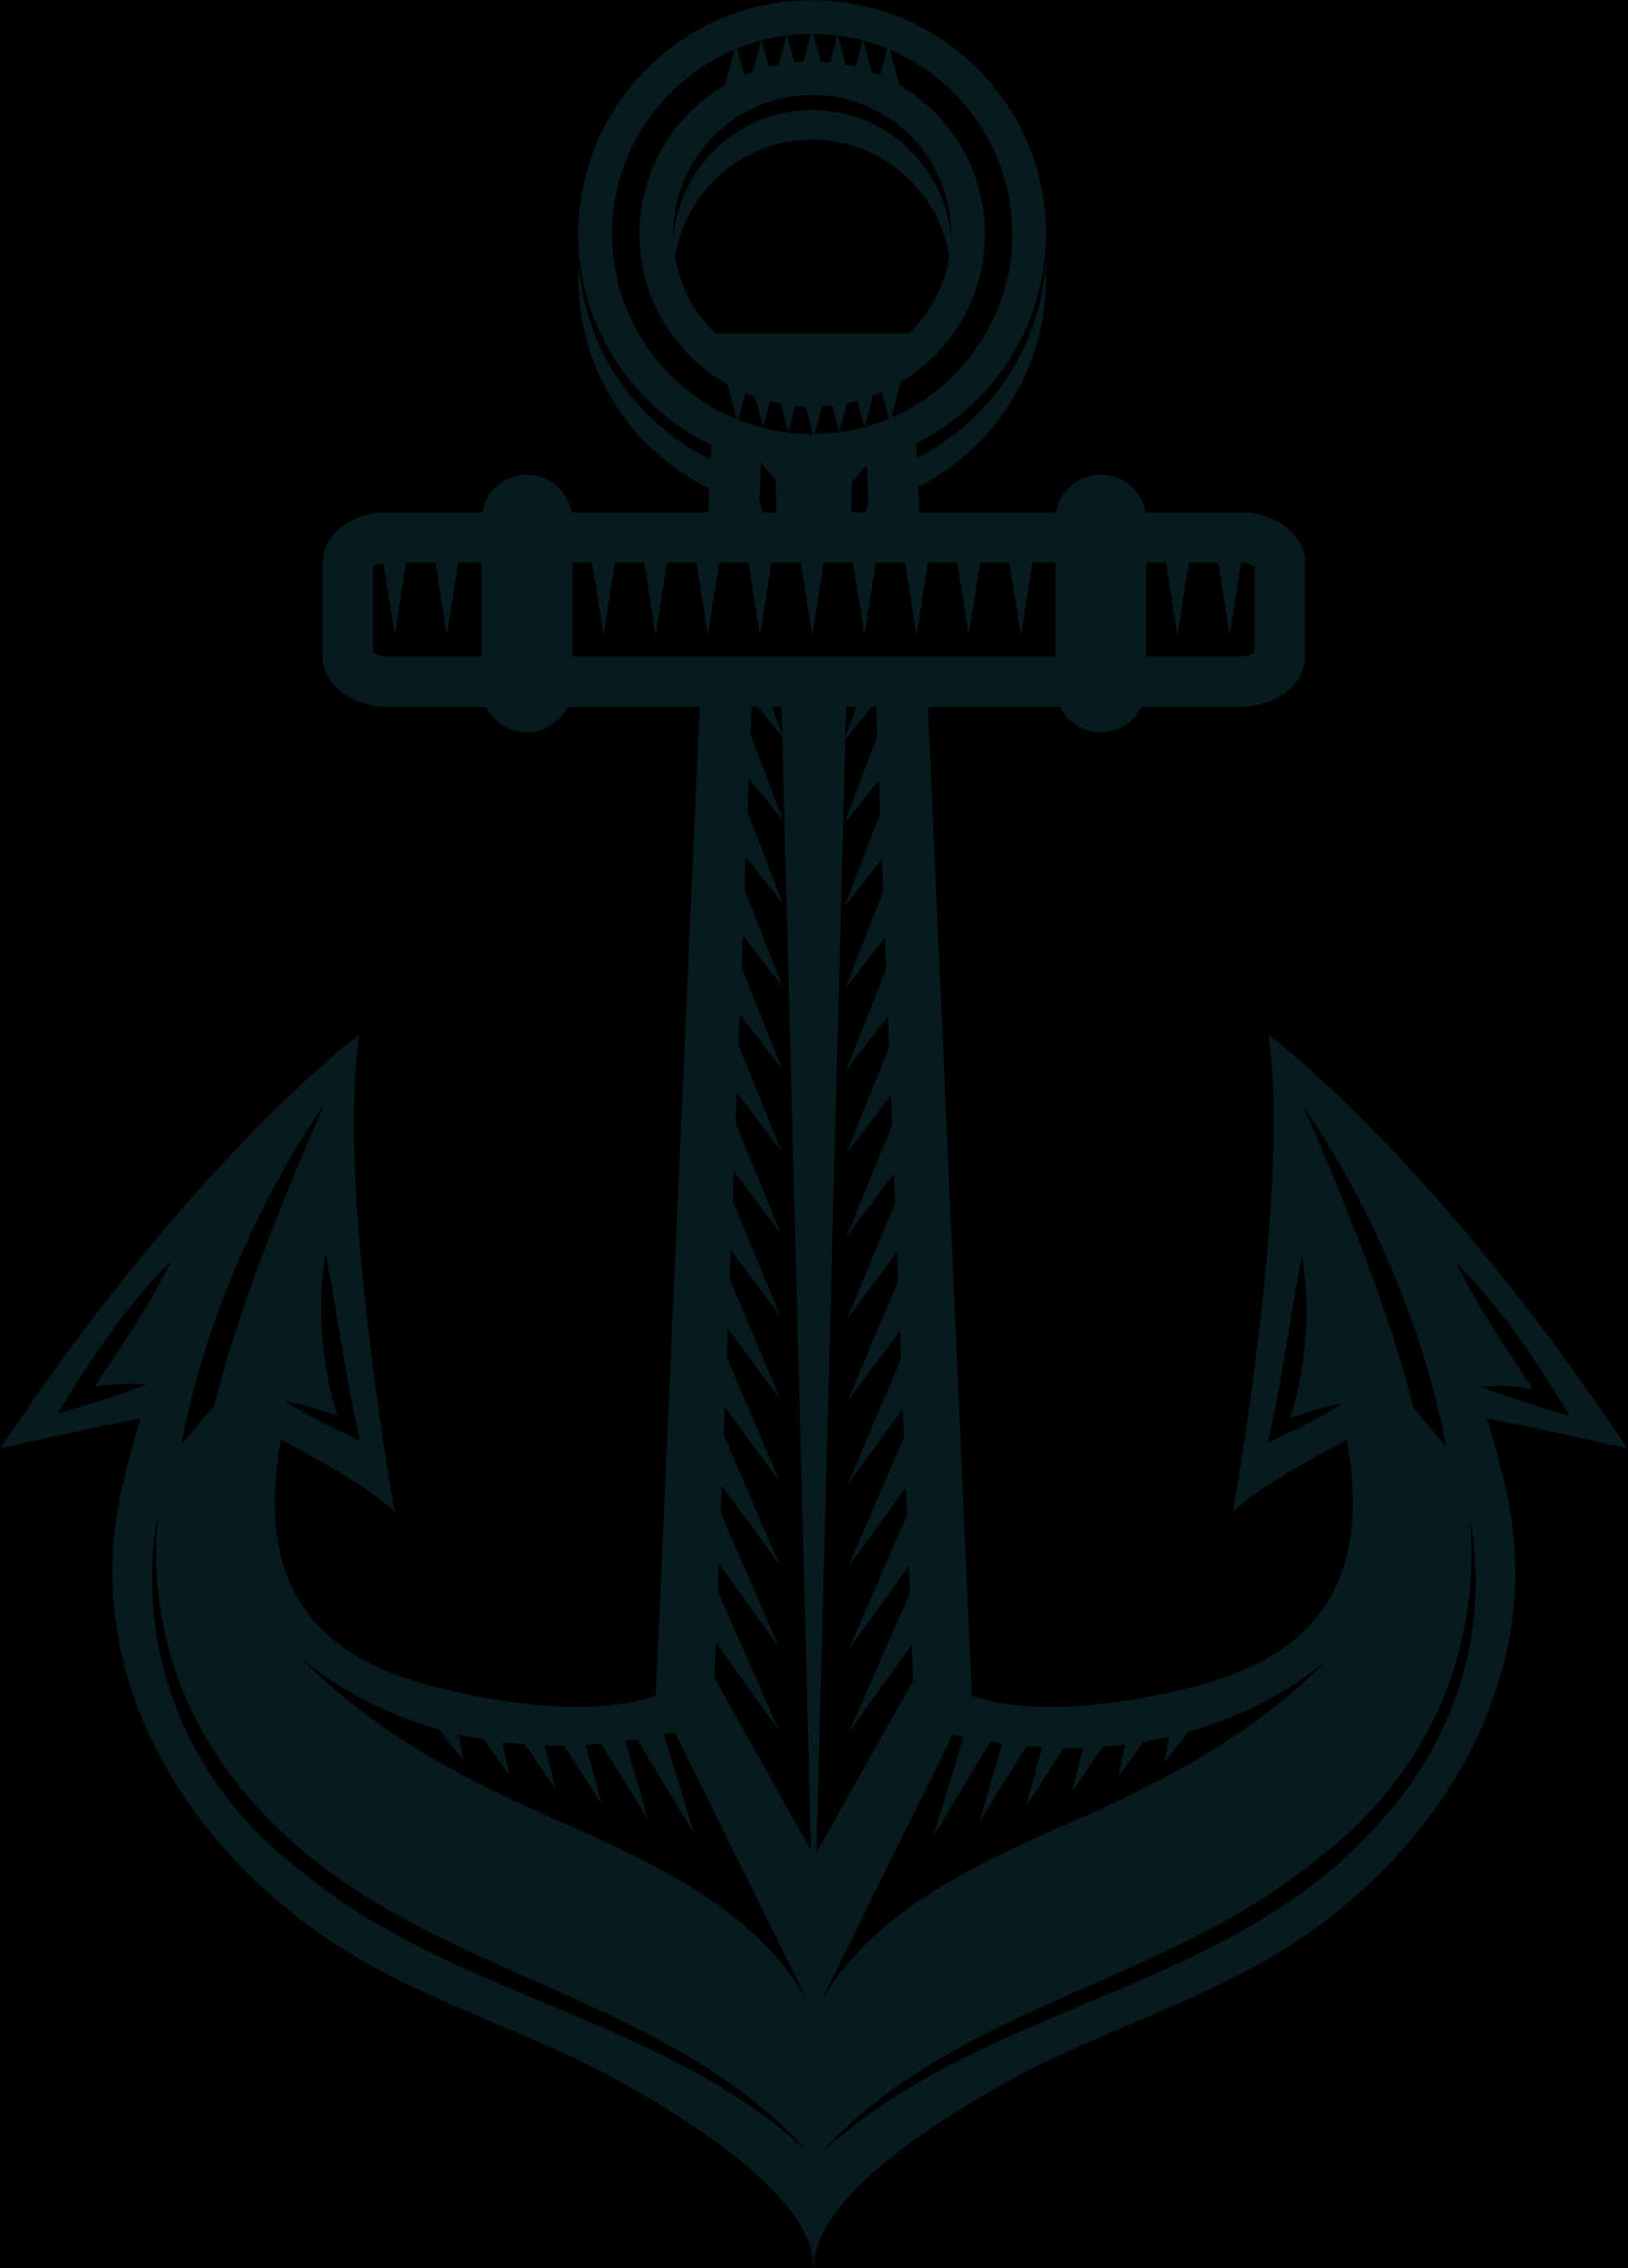 Nautical Anchor Graphic PNG